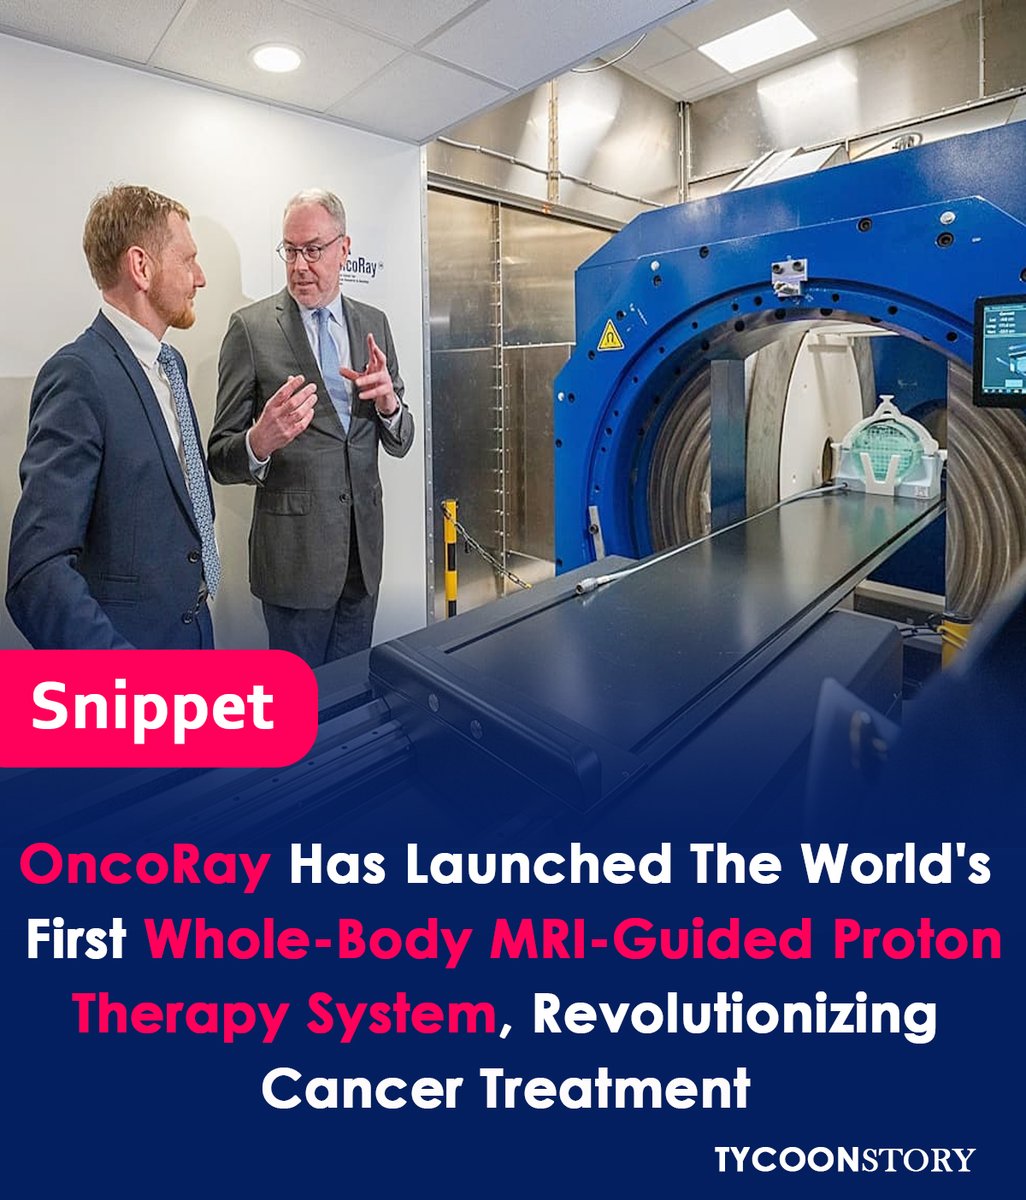 The First Spacecraft Manufacturing Facility Opened By Spacetech Startup Pixxel

#OncoRay #Innovation #ProtonTherapyRevolution #MRIguided #Treatment #CancerCare #PrecisionMedicine #MedicalTechnology  #GlobalHealthcare @OncoRayao 

tycoonstory.com